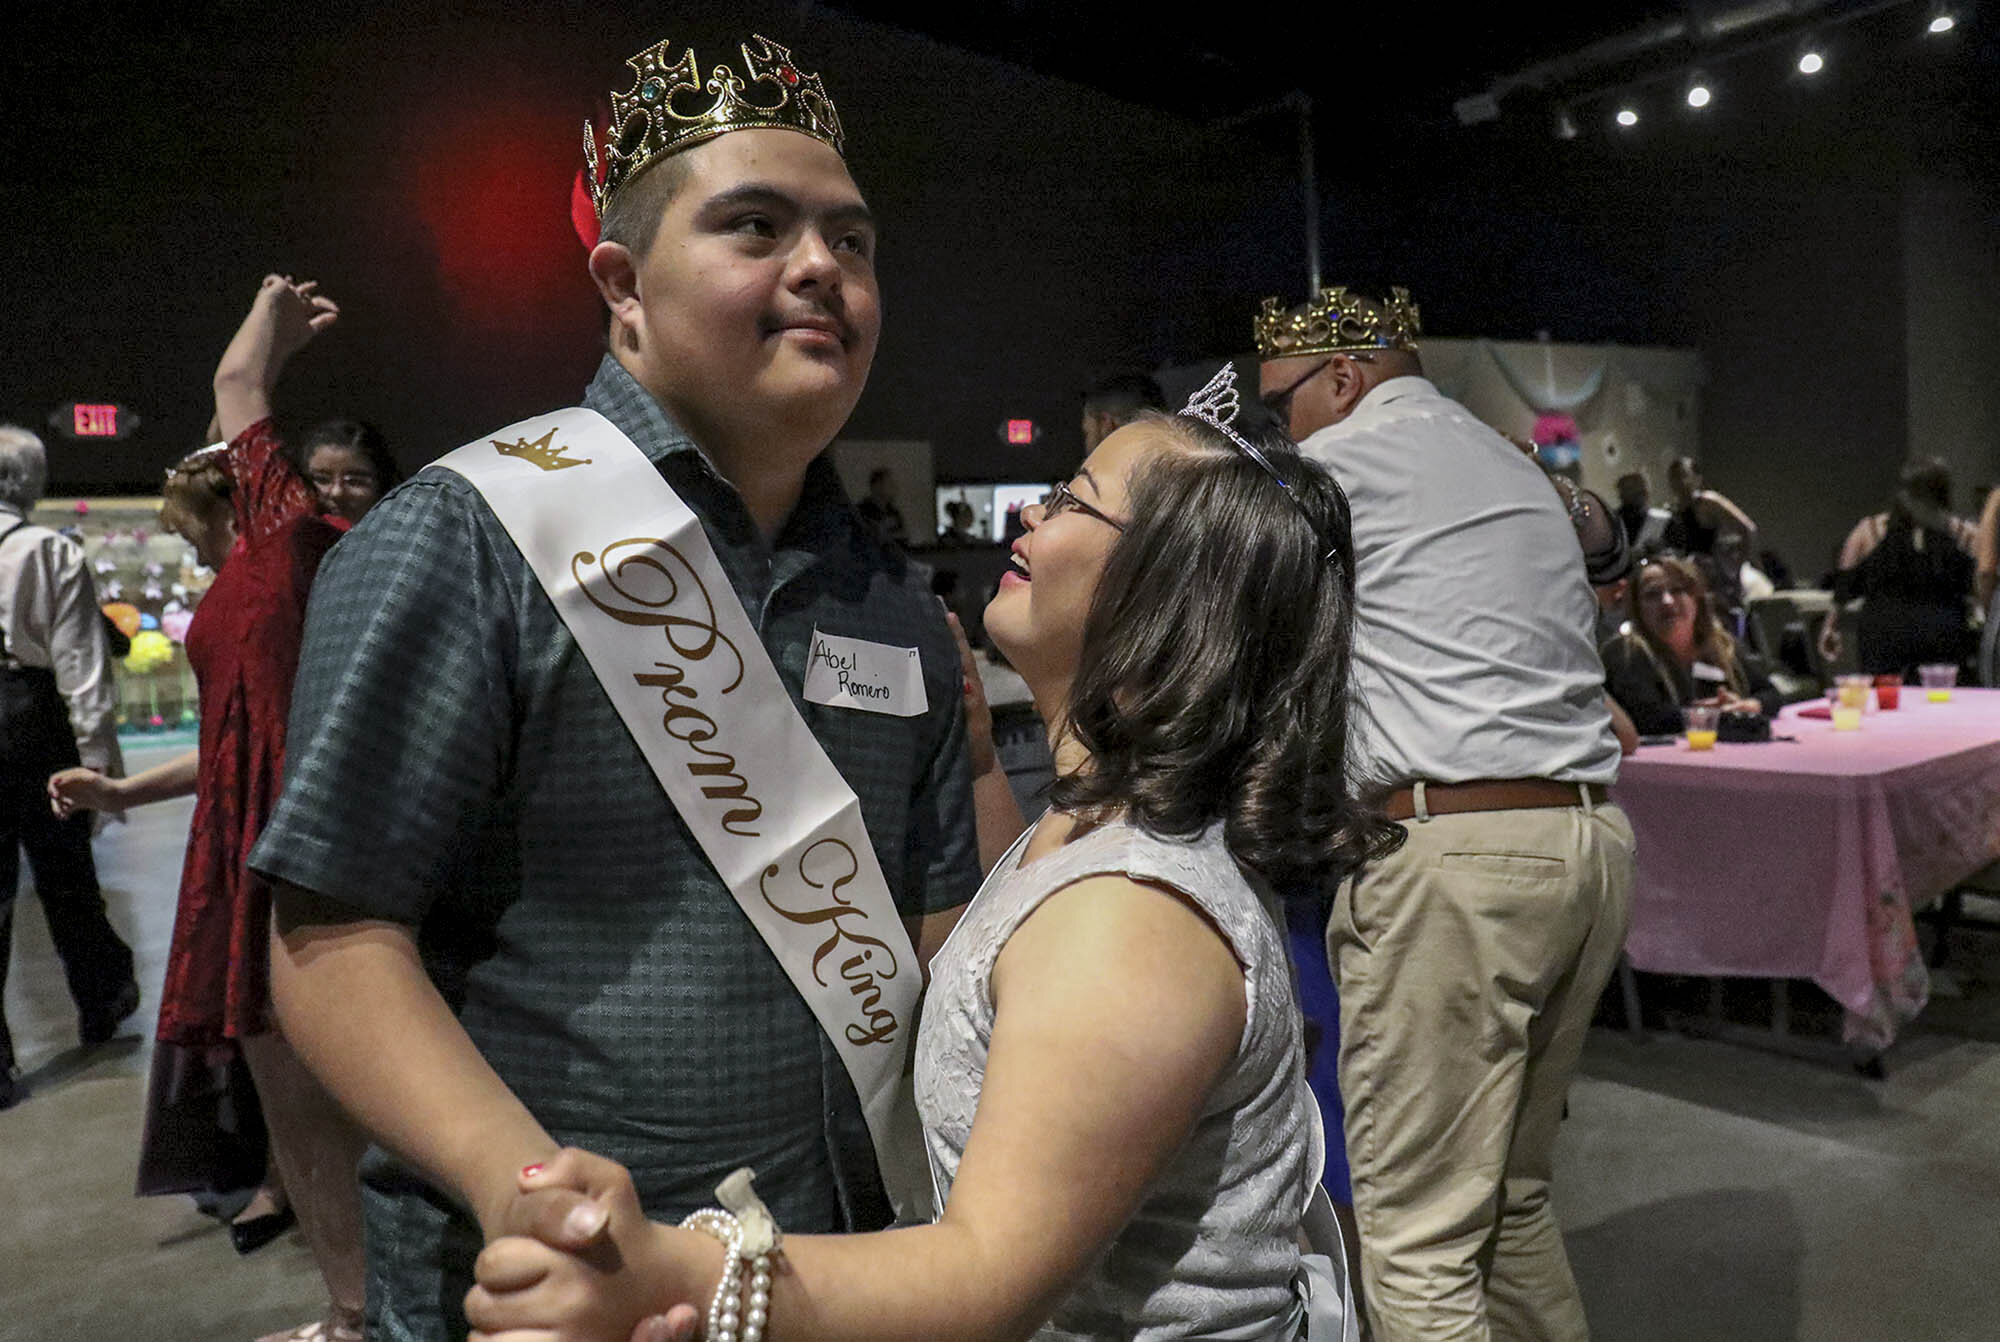  Abel Romero 21, dances with his friend Faith Romero 19, who are both students at Pojoaque High School and who drove to Santa Fe to attend the event. /Shot for  The Santa Fe New Mexican   